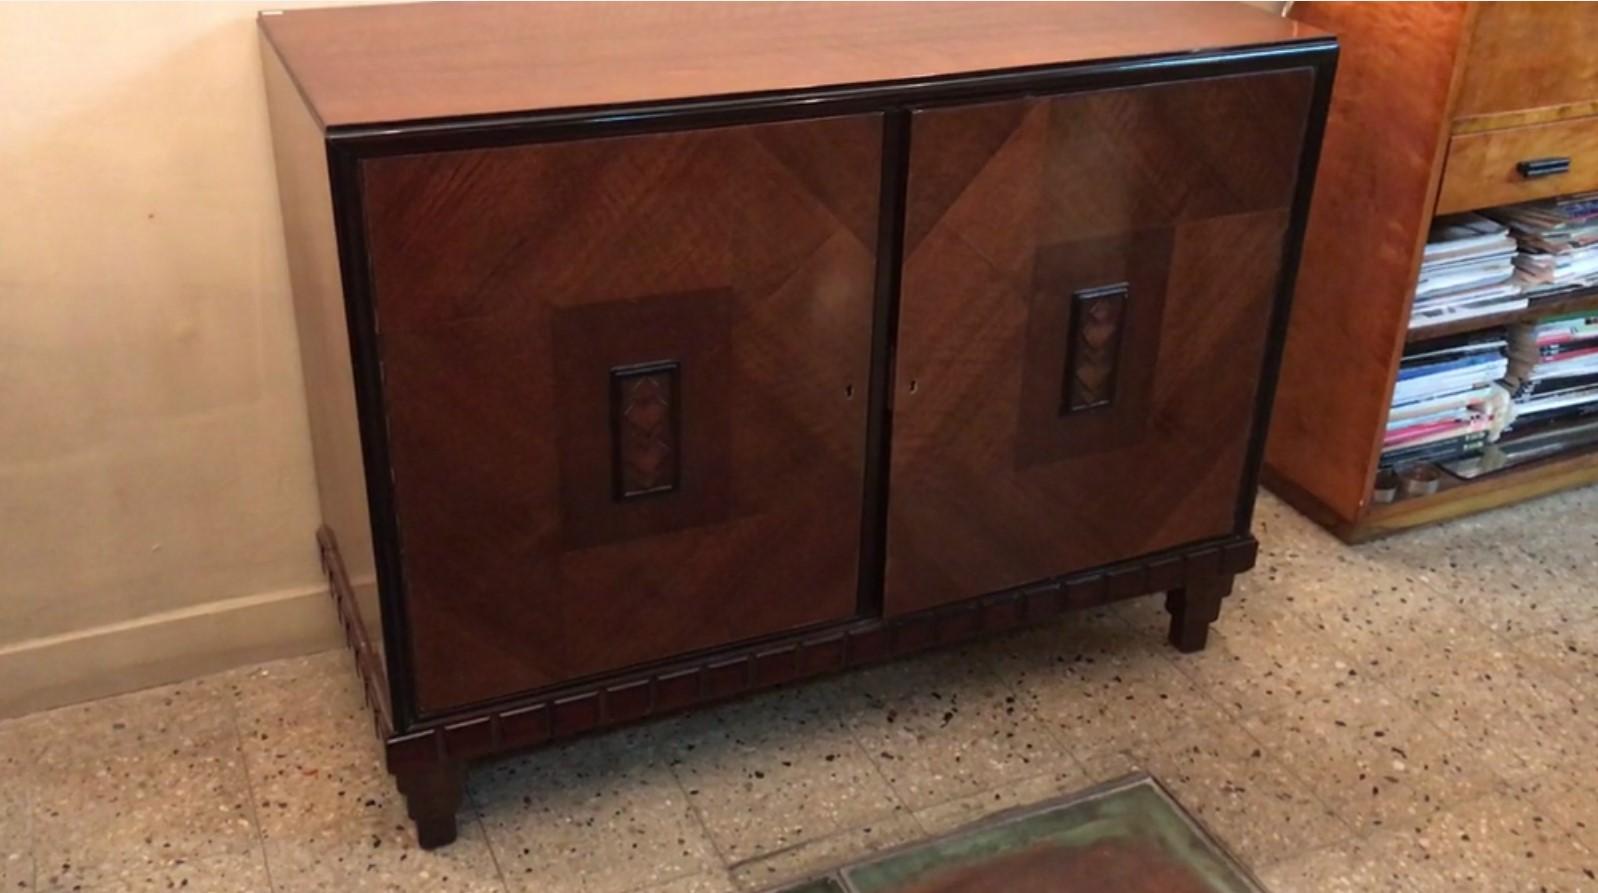 Luxury sideboard

Material: wood 
Style: Art Deco French
If you want to live in the golden years, this is the cupboard that your project needs.
We have specialized in the sale of Art Deco and Art Nouveau and Vintage styles since 1982. If you have